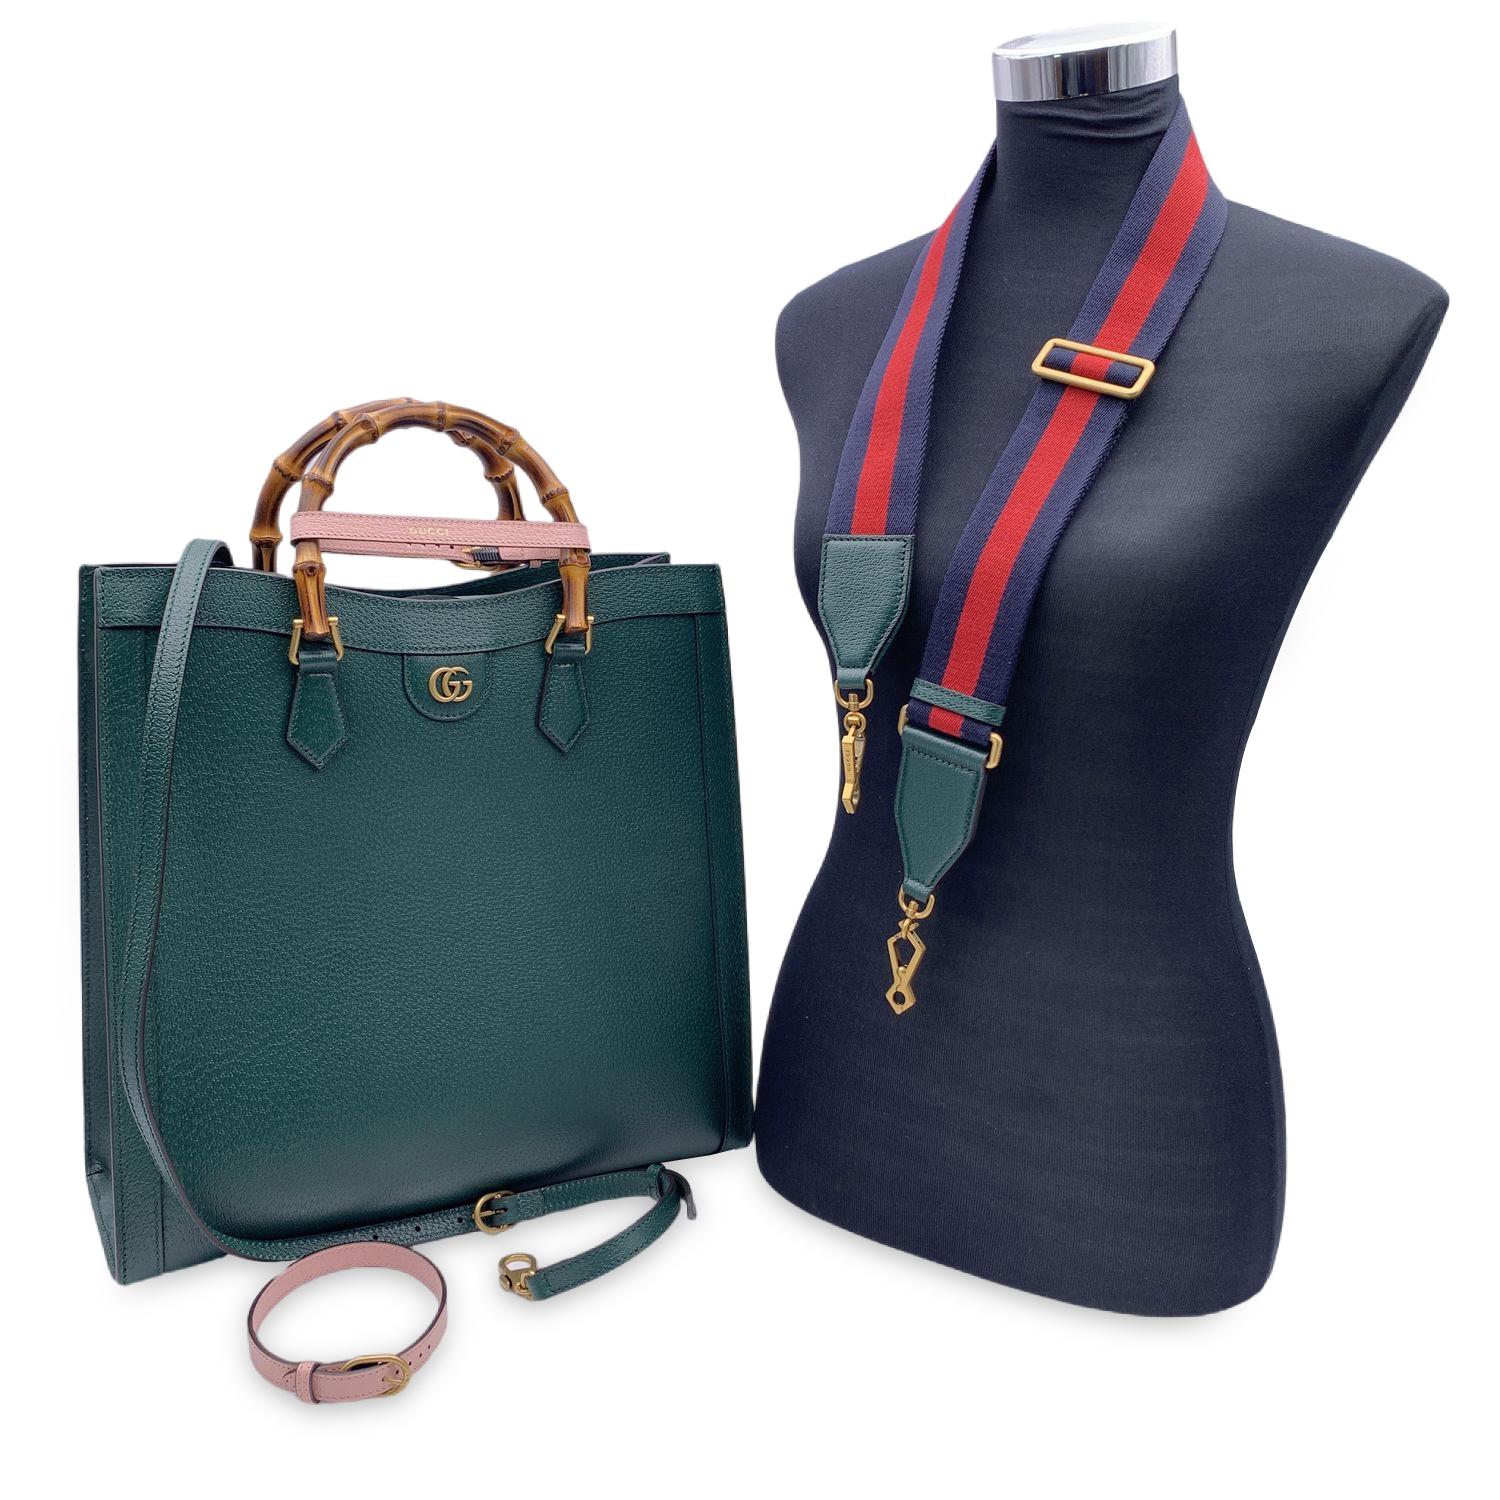 This beautiful Bag will come with a Certificate of Authenticity provided by Entrupy. The certificate will be provided at no further cost

Gucci re-designed the vintage classic model of the Diana bag with this 'Diana GG Bamboo XL' bag. Made of dark